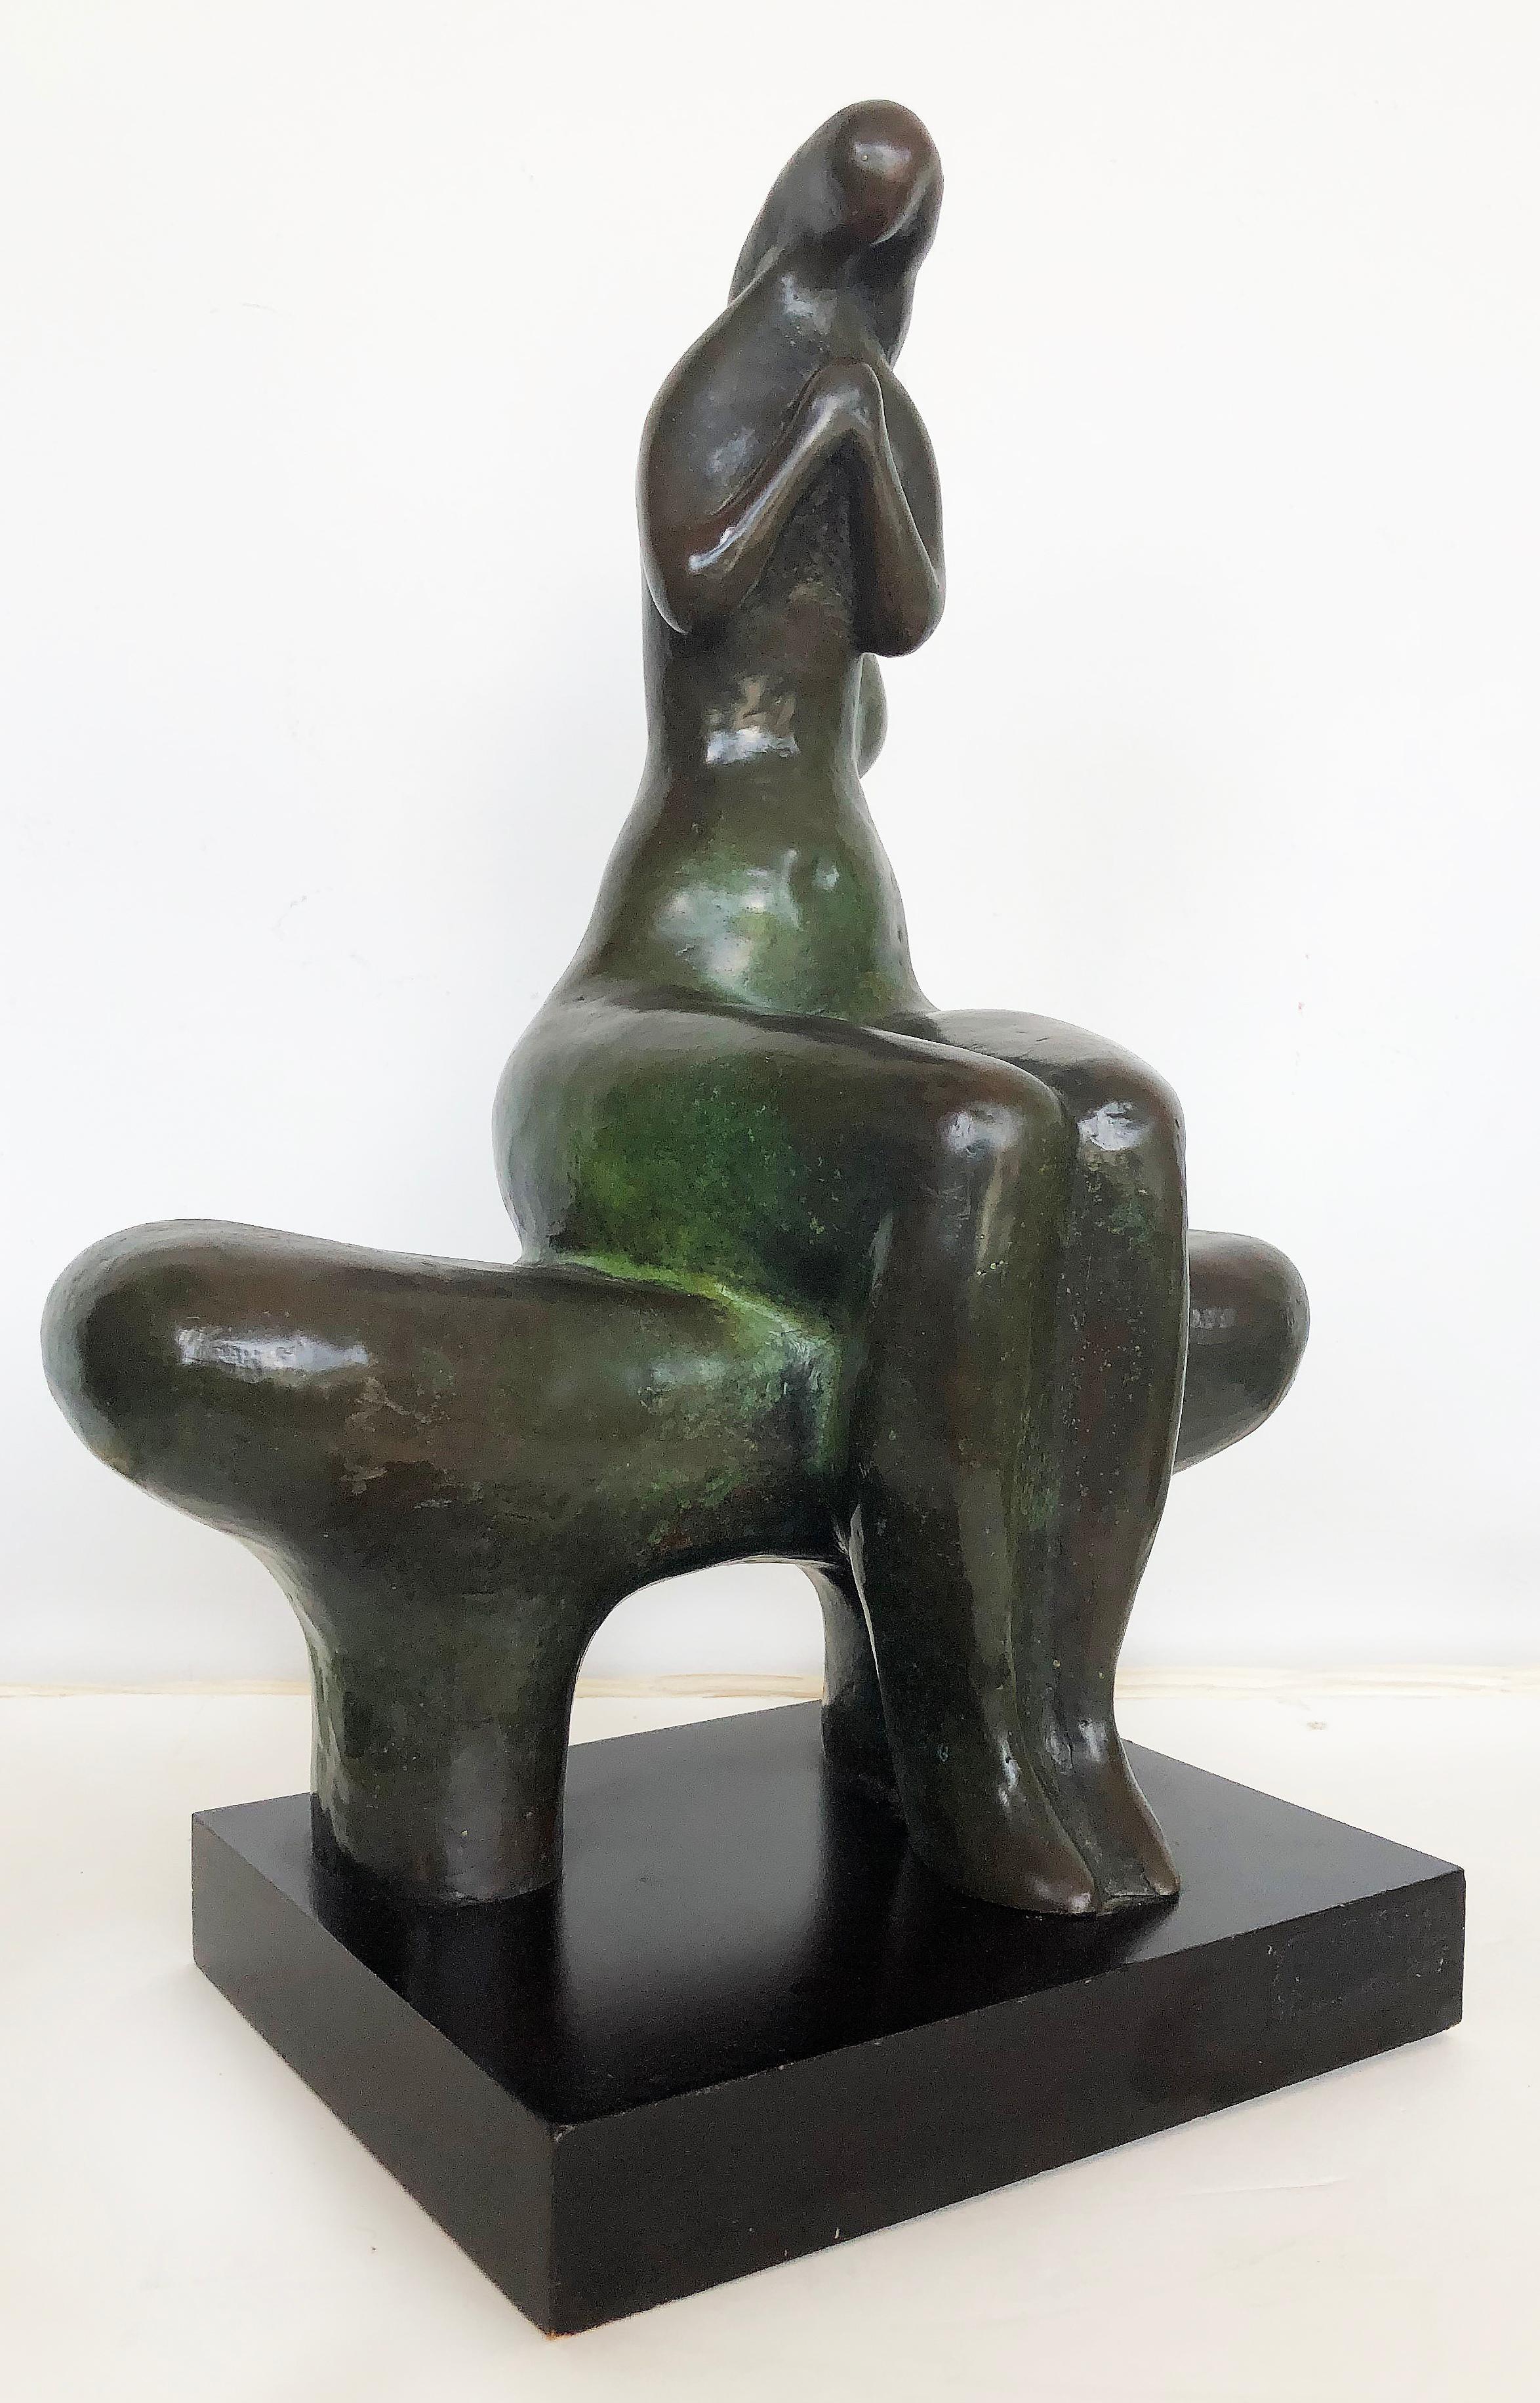 Vintage abstract bronze nude sculpture by Dorter Berner

Offered for sale is a bronze Brutalist nude sculpture with a verdigris patina by Dörte Berner (B. 1942) who is Namibia's most acclaimed sculpture artist. The sinuous lines of the seated nude